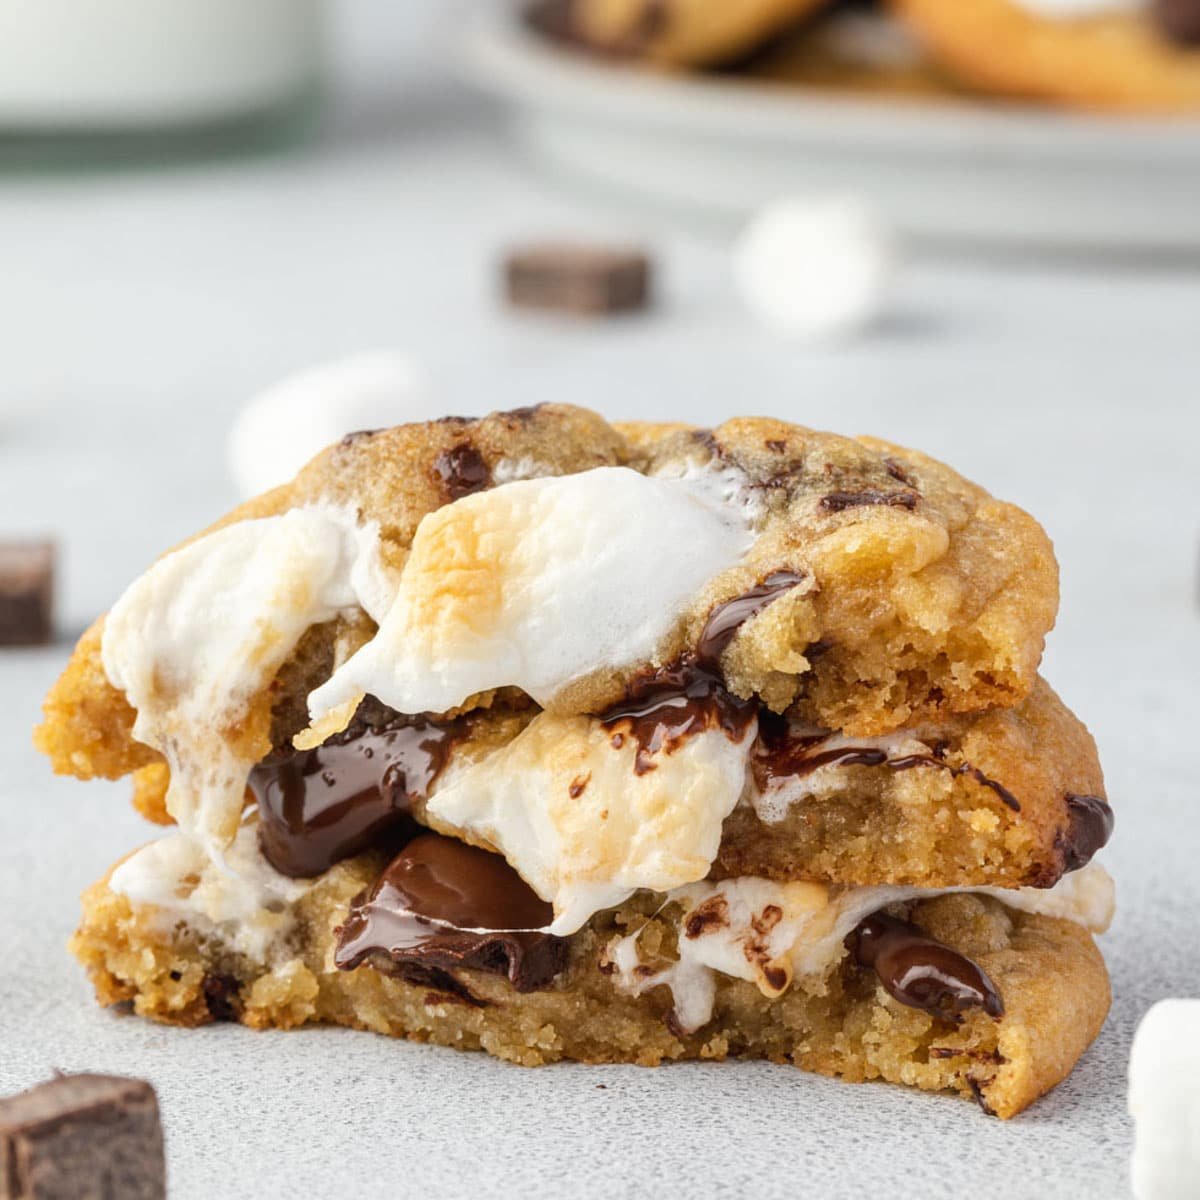 https://stateofdinner.com/wp-content/uploads/2021/08/marshmallow-chocolate-cookie-feautred.jpg